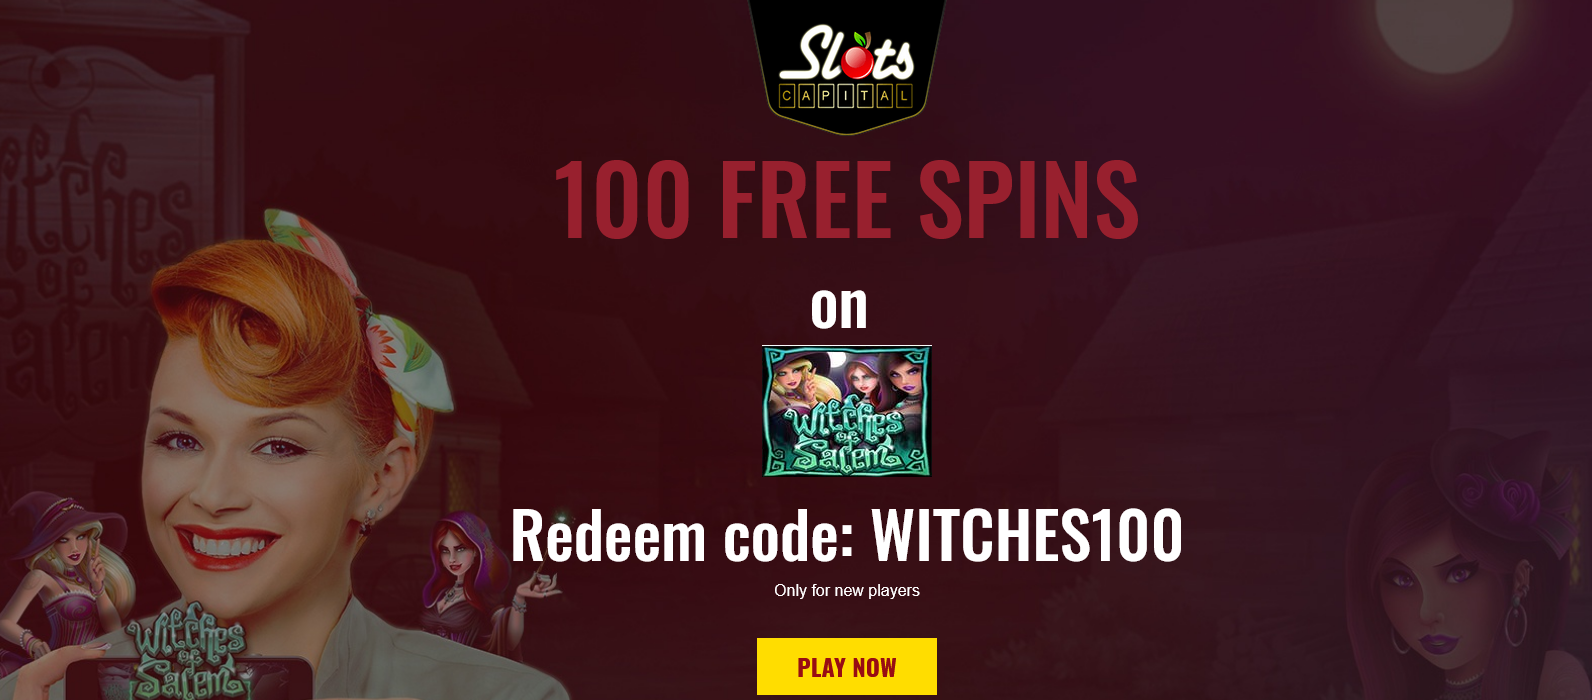 Slots Capital 100 Free Spins
                                                          WITCHES100